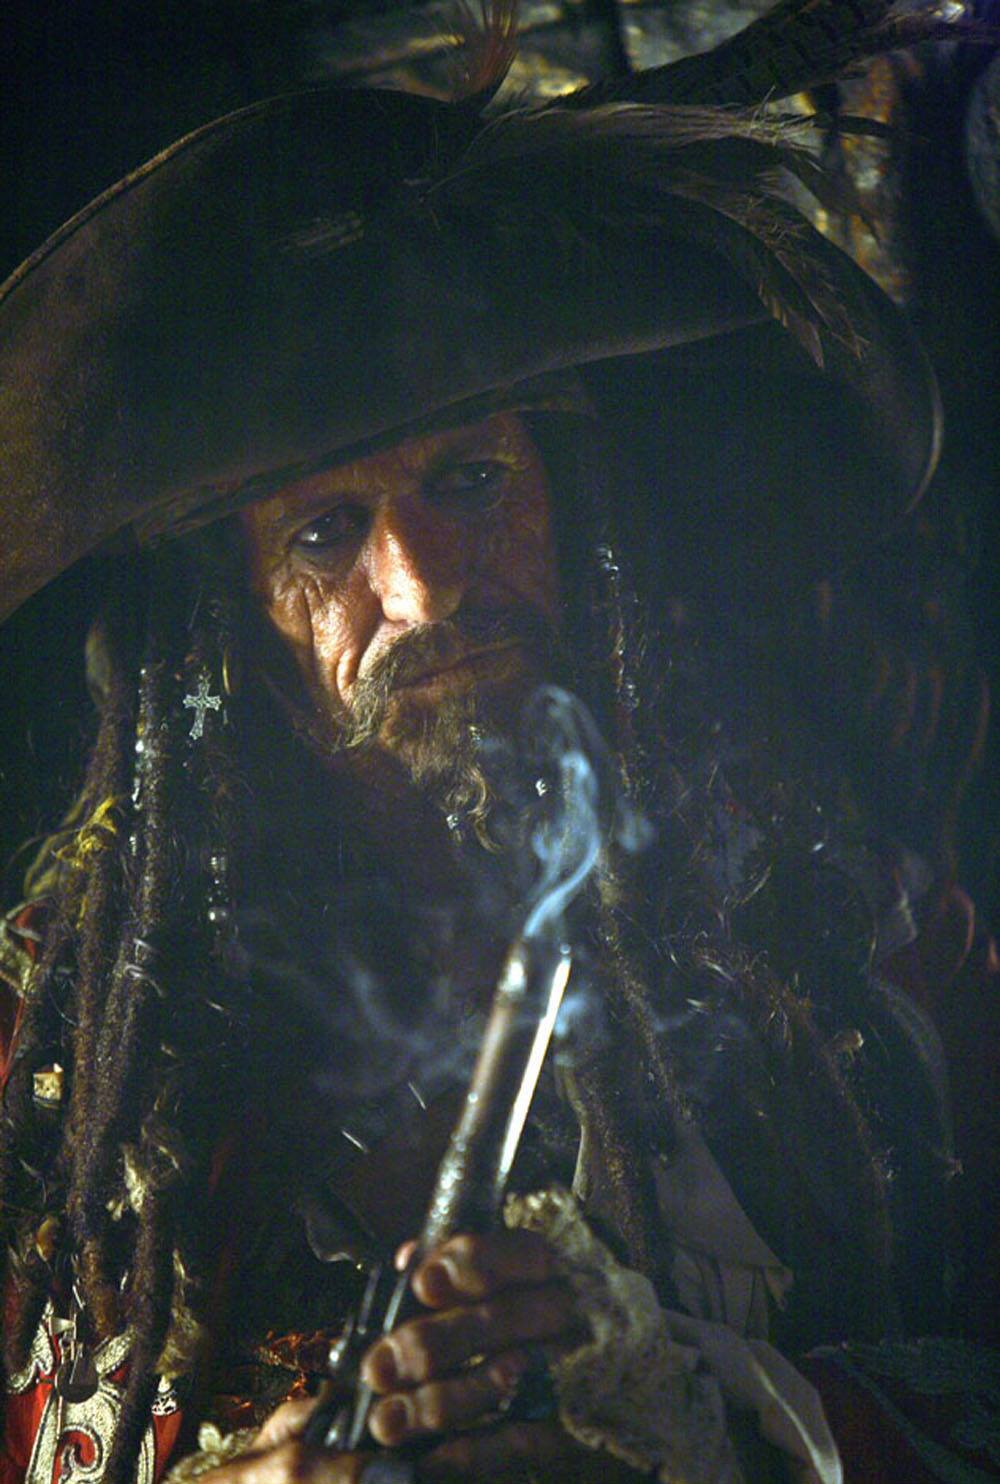 Keep to the Code (website), Pirates of the Caribbean Wiki